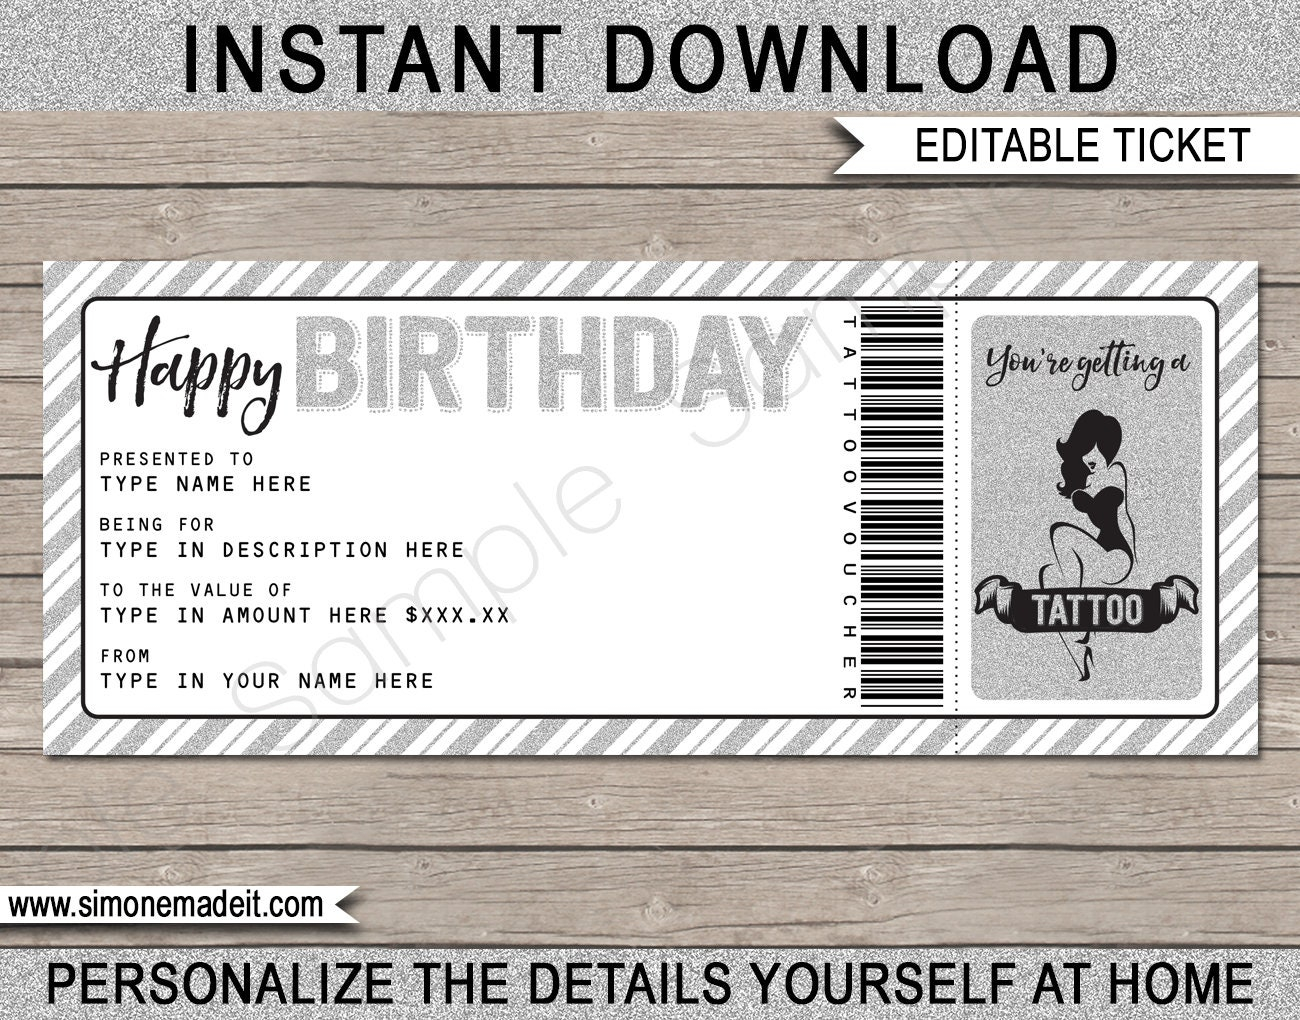 Tattoo Gift Voucher Template - Printable Birthday Gift Ticket Certificate  Card Coupon - Get Inked - EDITABLE TEXT DOWNLOAD - you personalize With Tattoo Gift Certificate Template